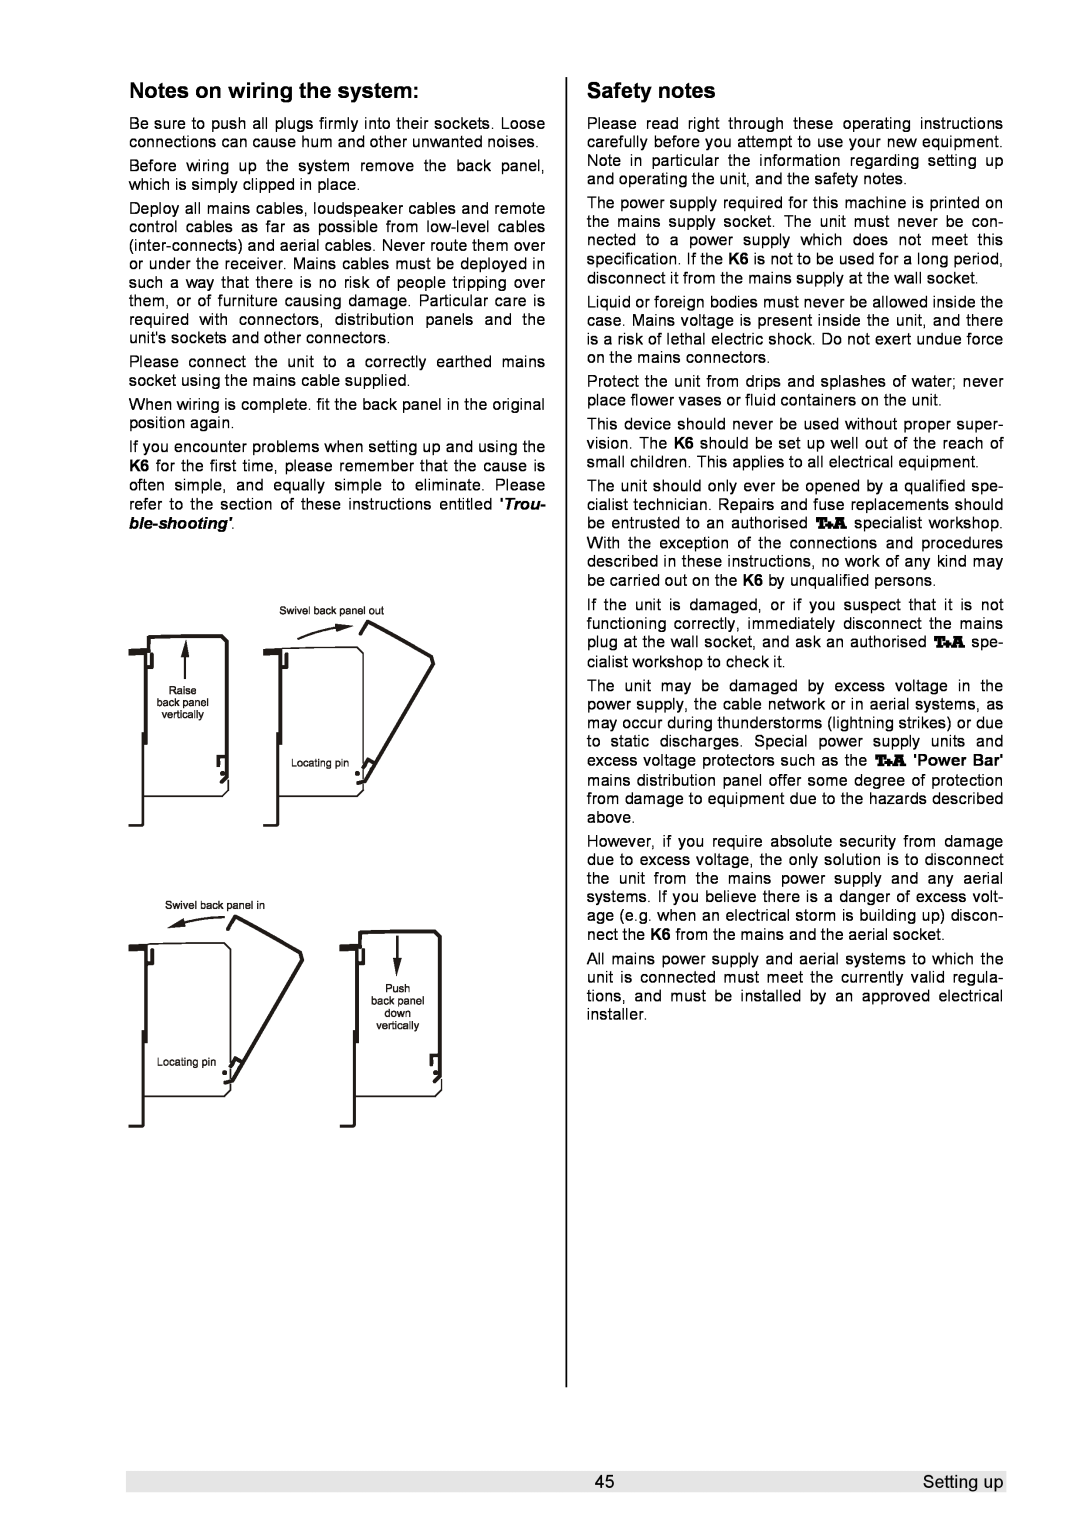 T+A Elektroakustik K 6 user manual Notes on wiring the system, Safety notes, Settingup 